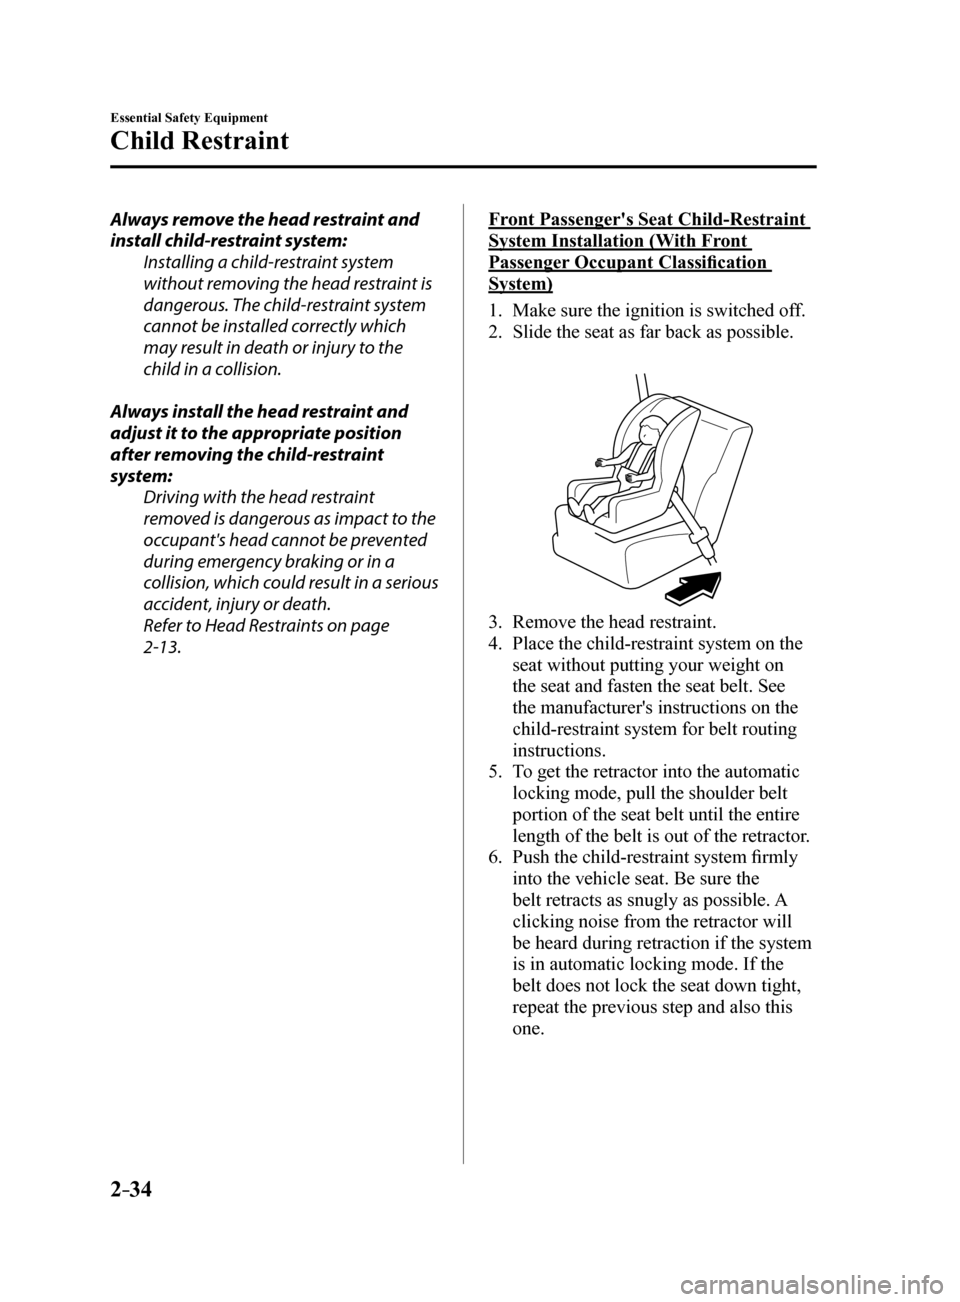 MAZDA MODEL 6 2017   (in English) Service Manual 2–34
Essential Safety Equipment
Child Restraint
Always remove the head restraint and 
install child-restraint system:Installing a child-restraint system 
without removing the head restraint is 
dang